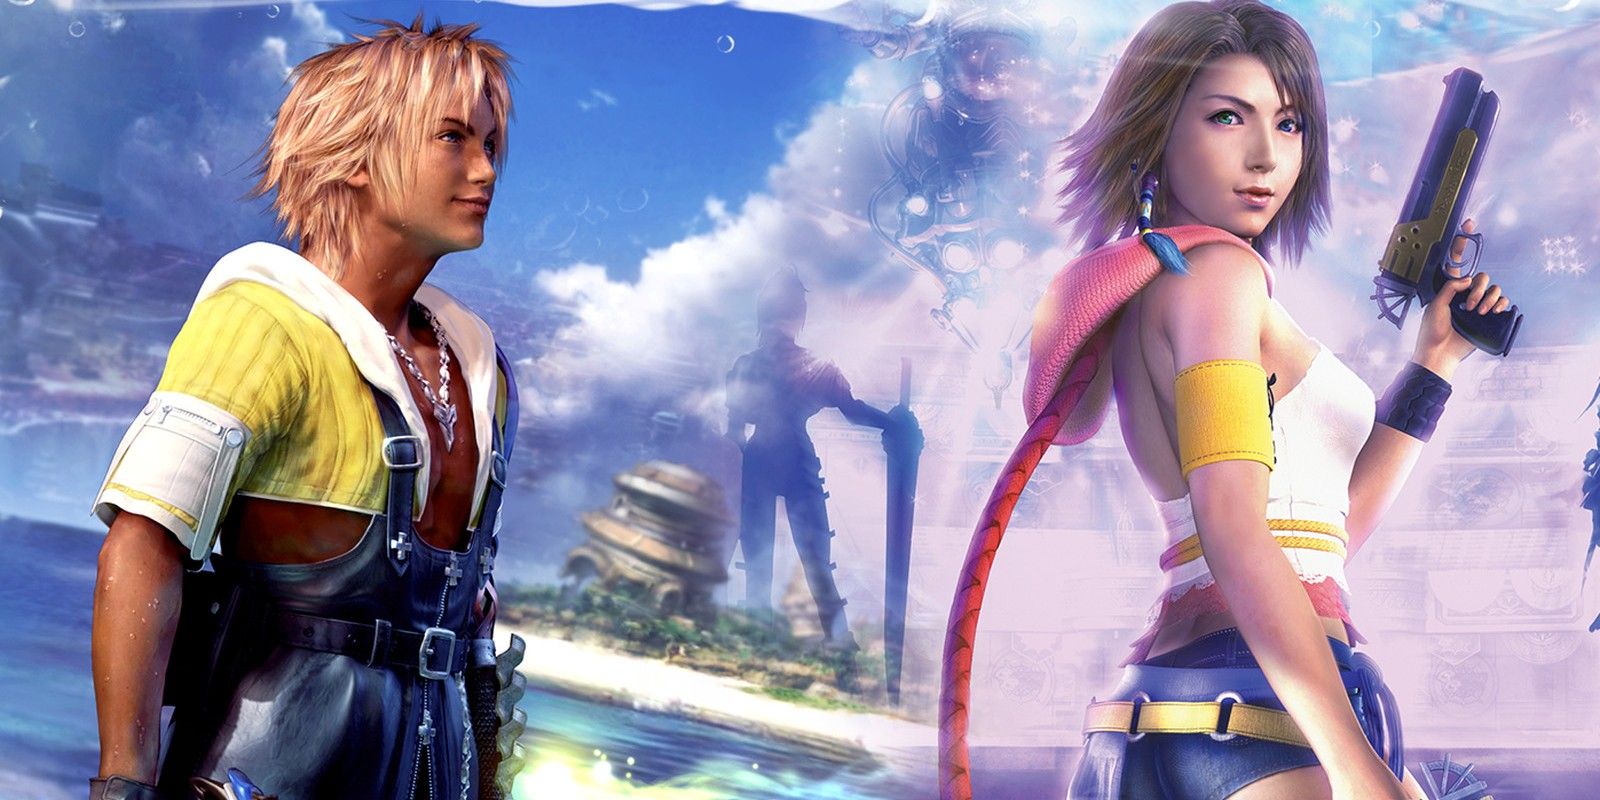 FFX-3 May Be Coming After FF7R